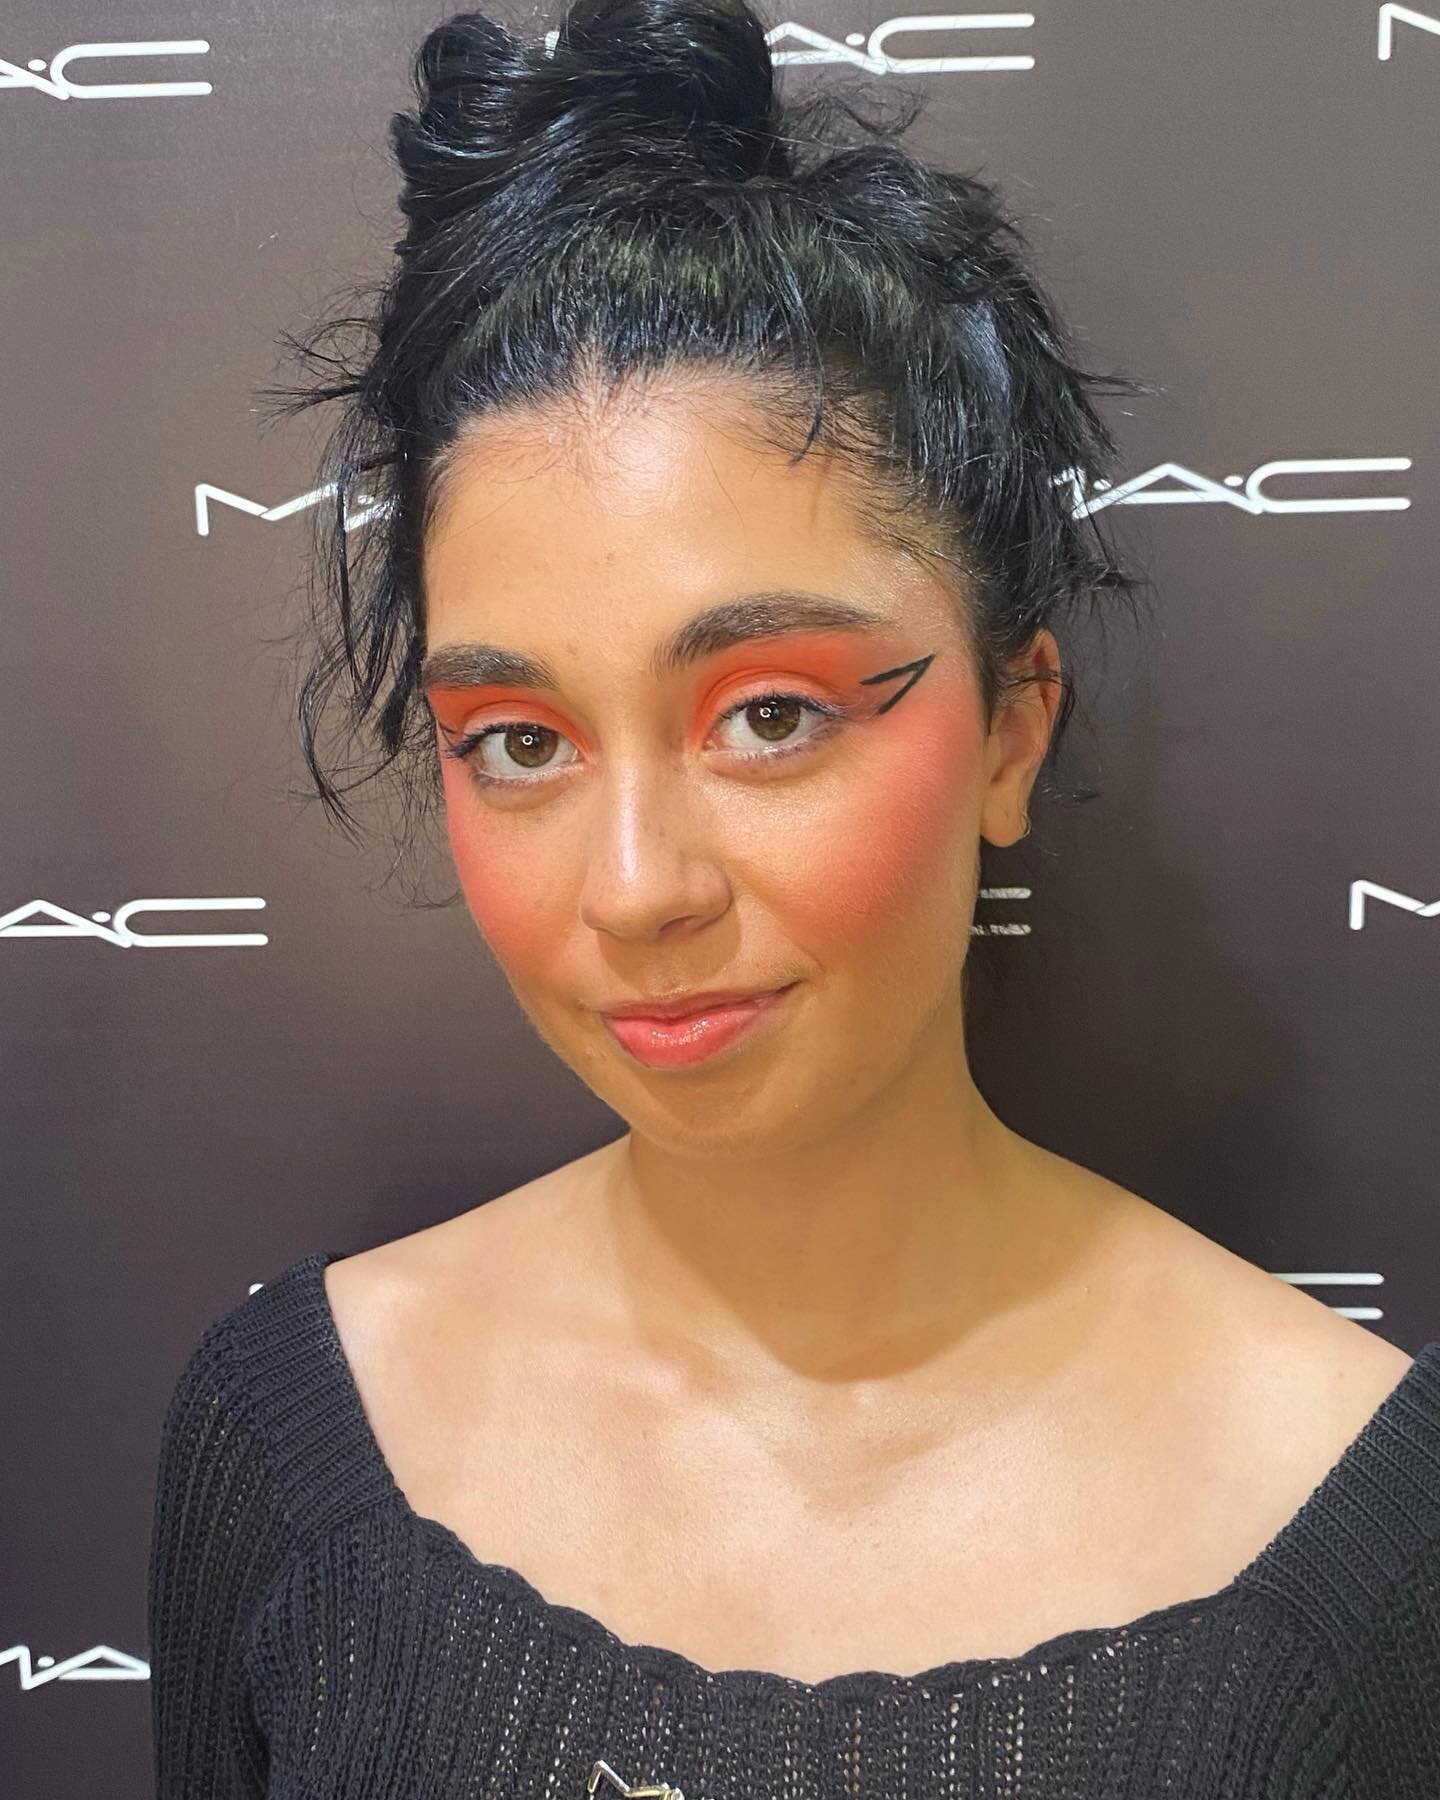 🔥ARTISTRY NIGHT🔥
Draped blush, graphic liner and glazed skin&hellip; I&rsquo;m in heaven!
Loved using the new @maccosmetics Strobe Dewy Skin Tint and the Hyper Real Skincare to create this goregous look on the even more gorgeous @serenagray18 ❤️&zw